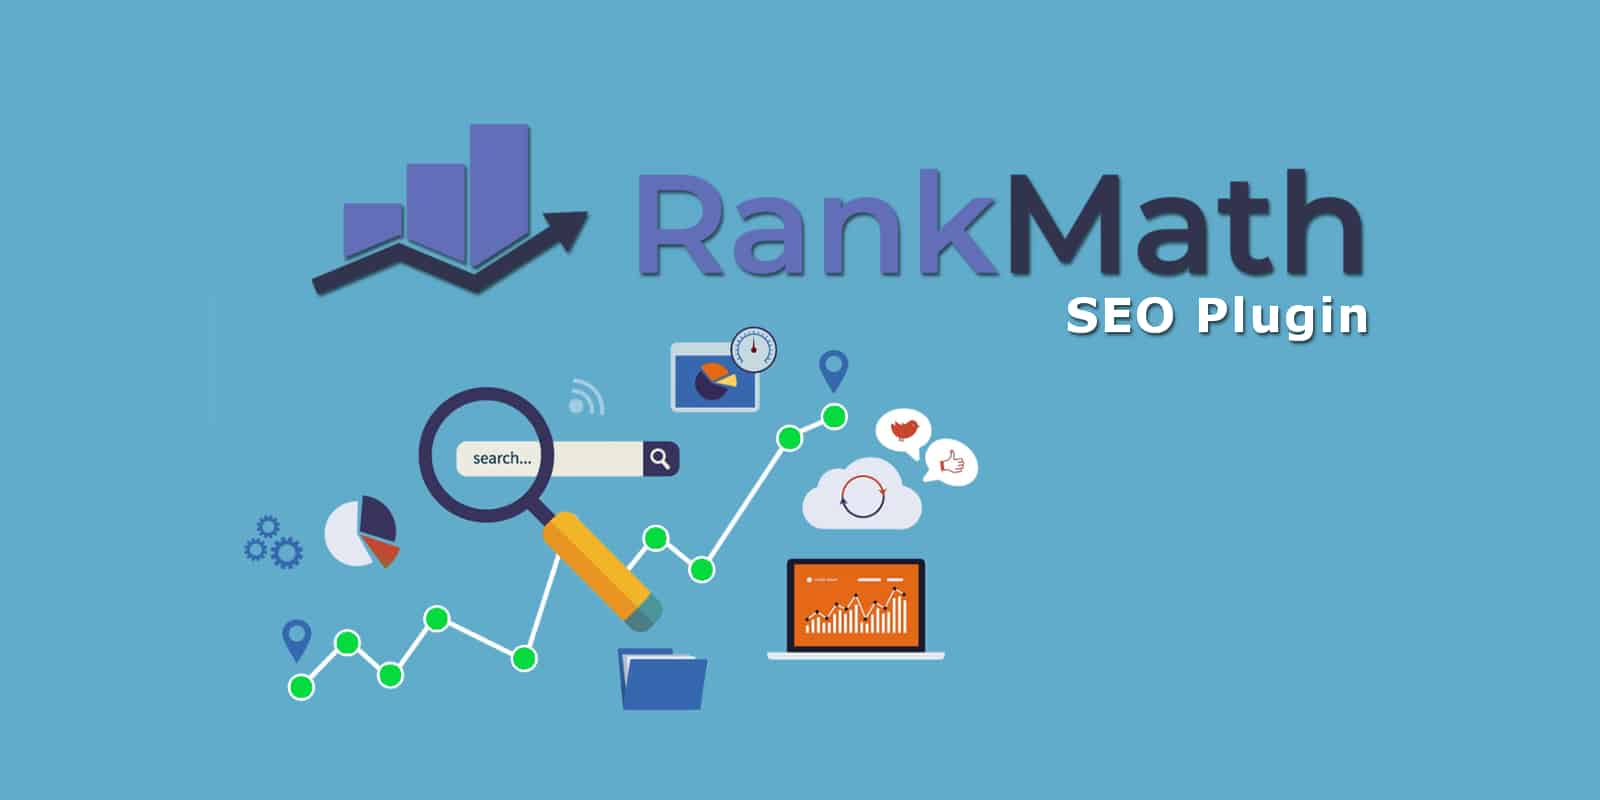 How to Use Rank Math for SEO?